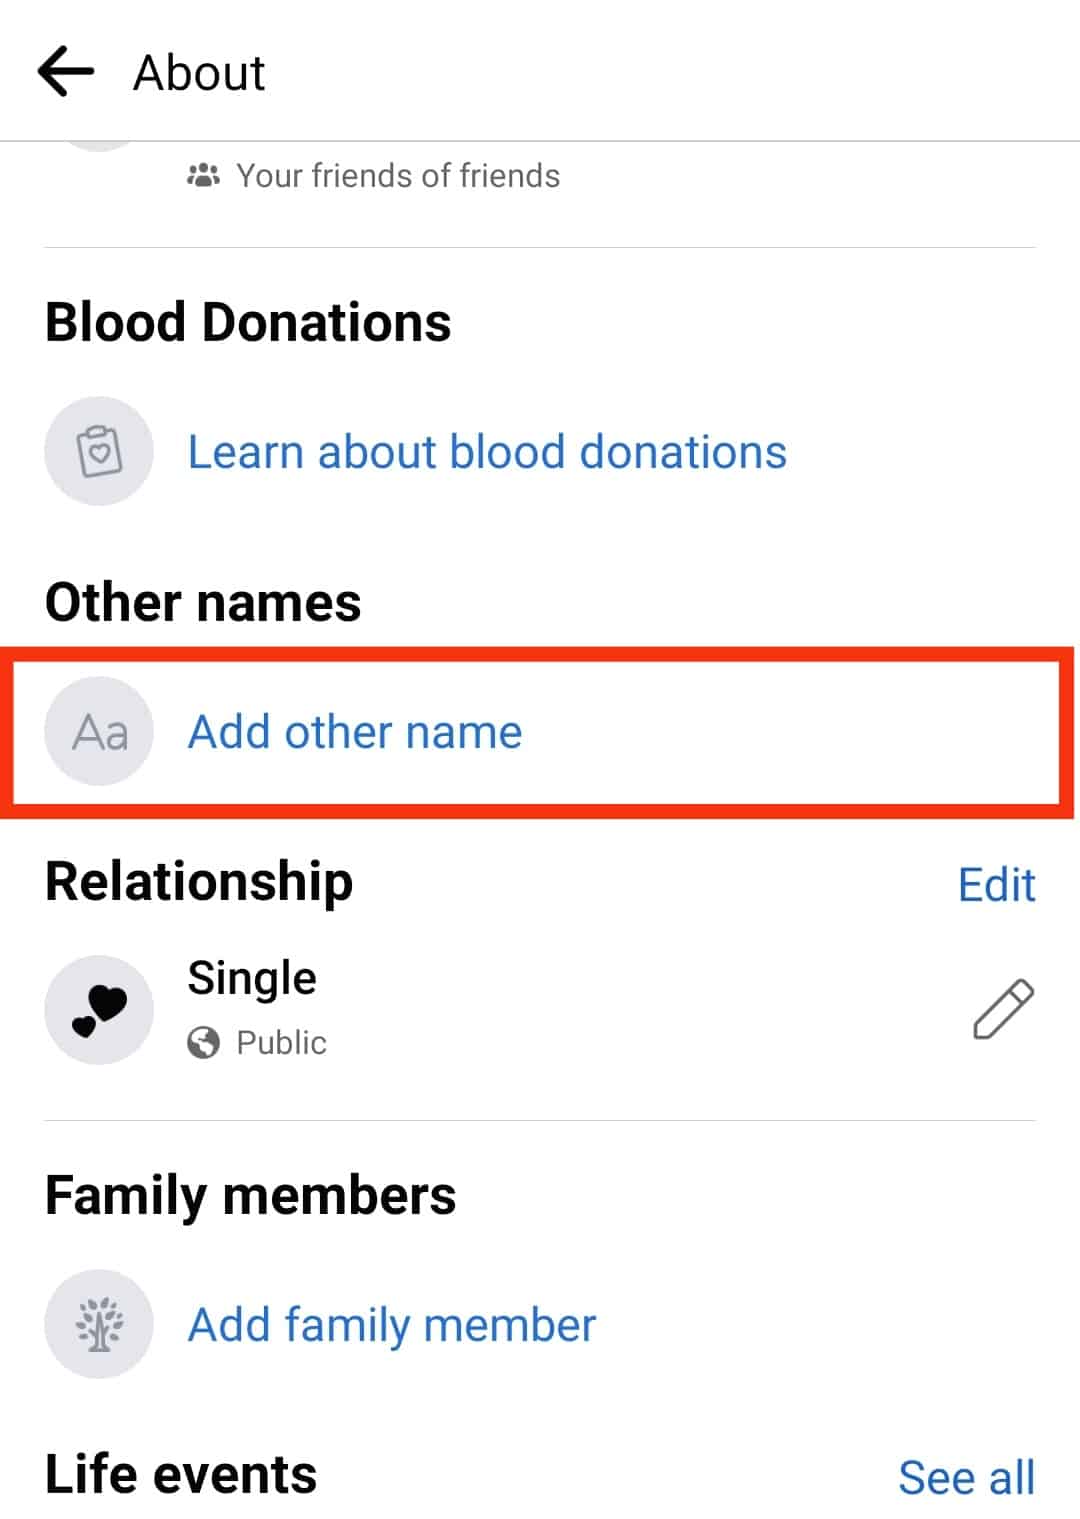 Click The Option To Add A Other Name